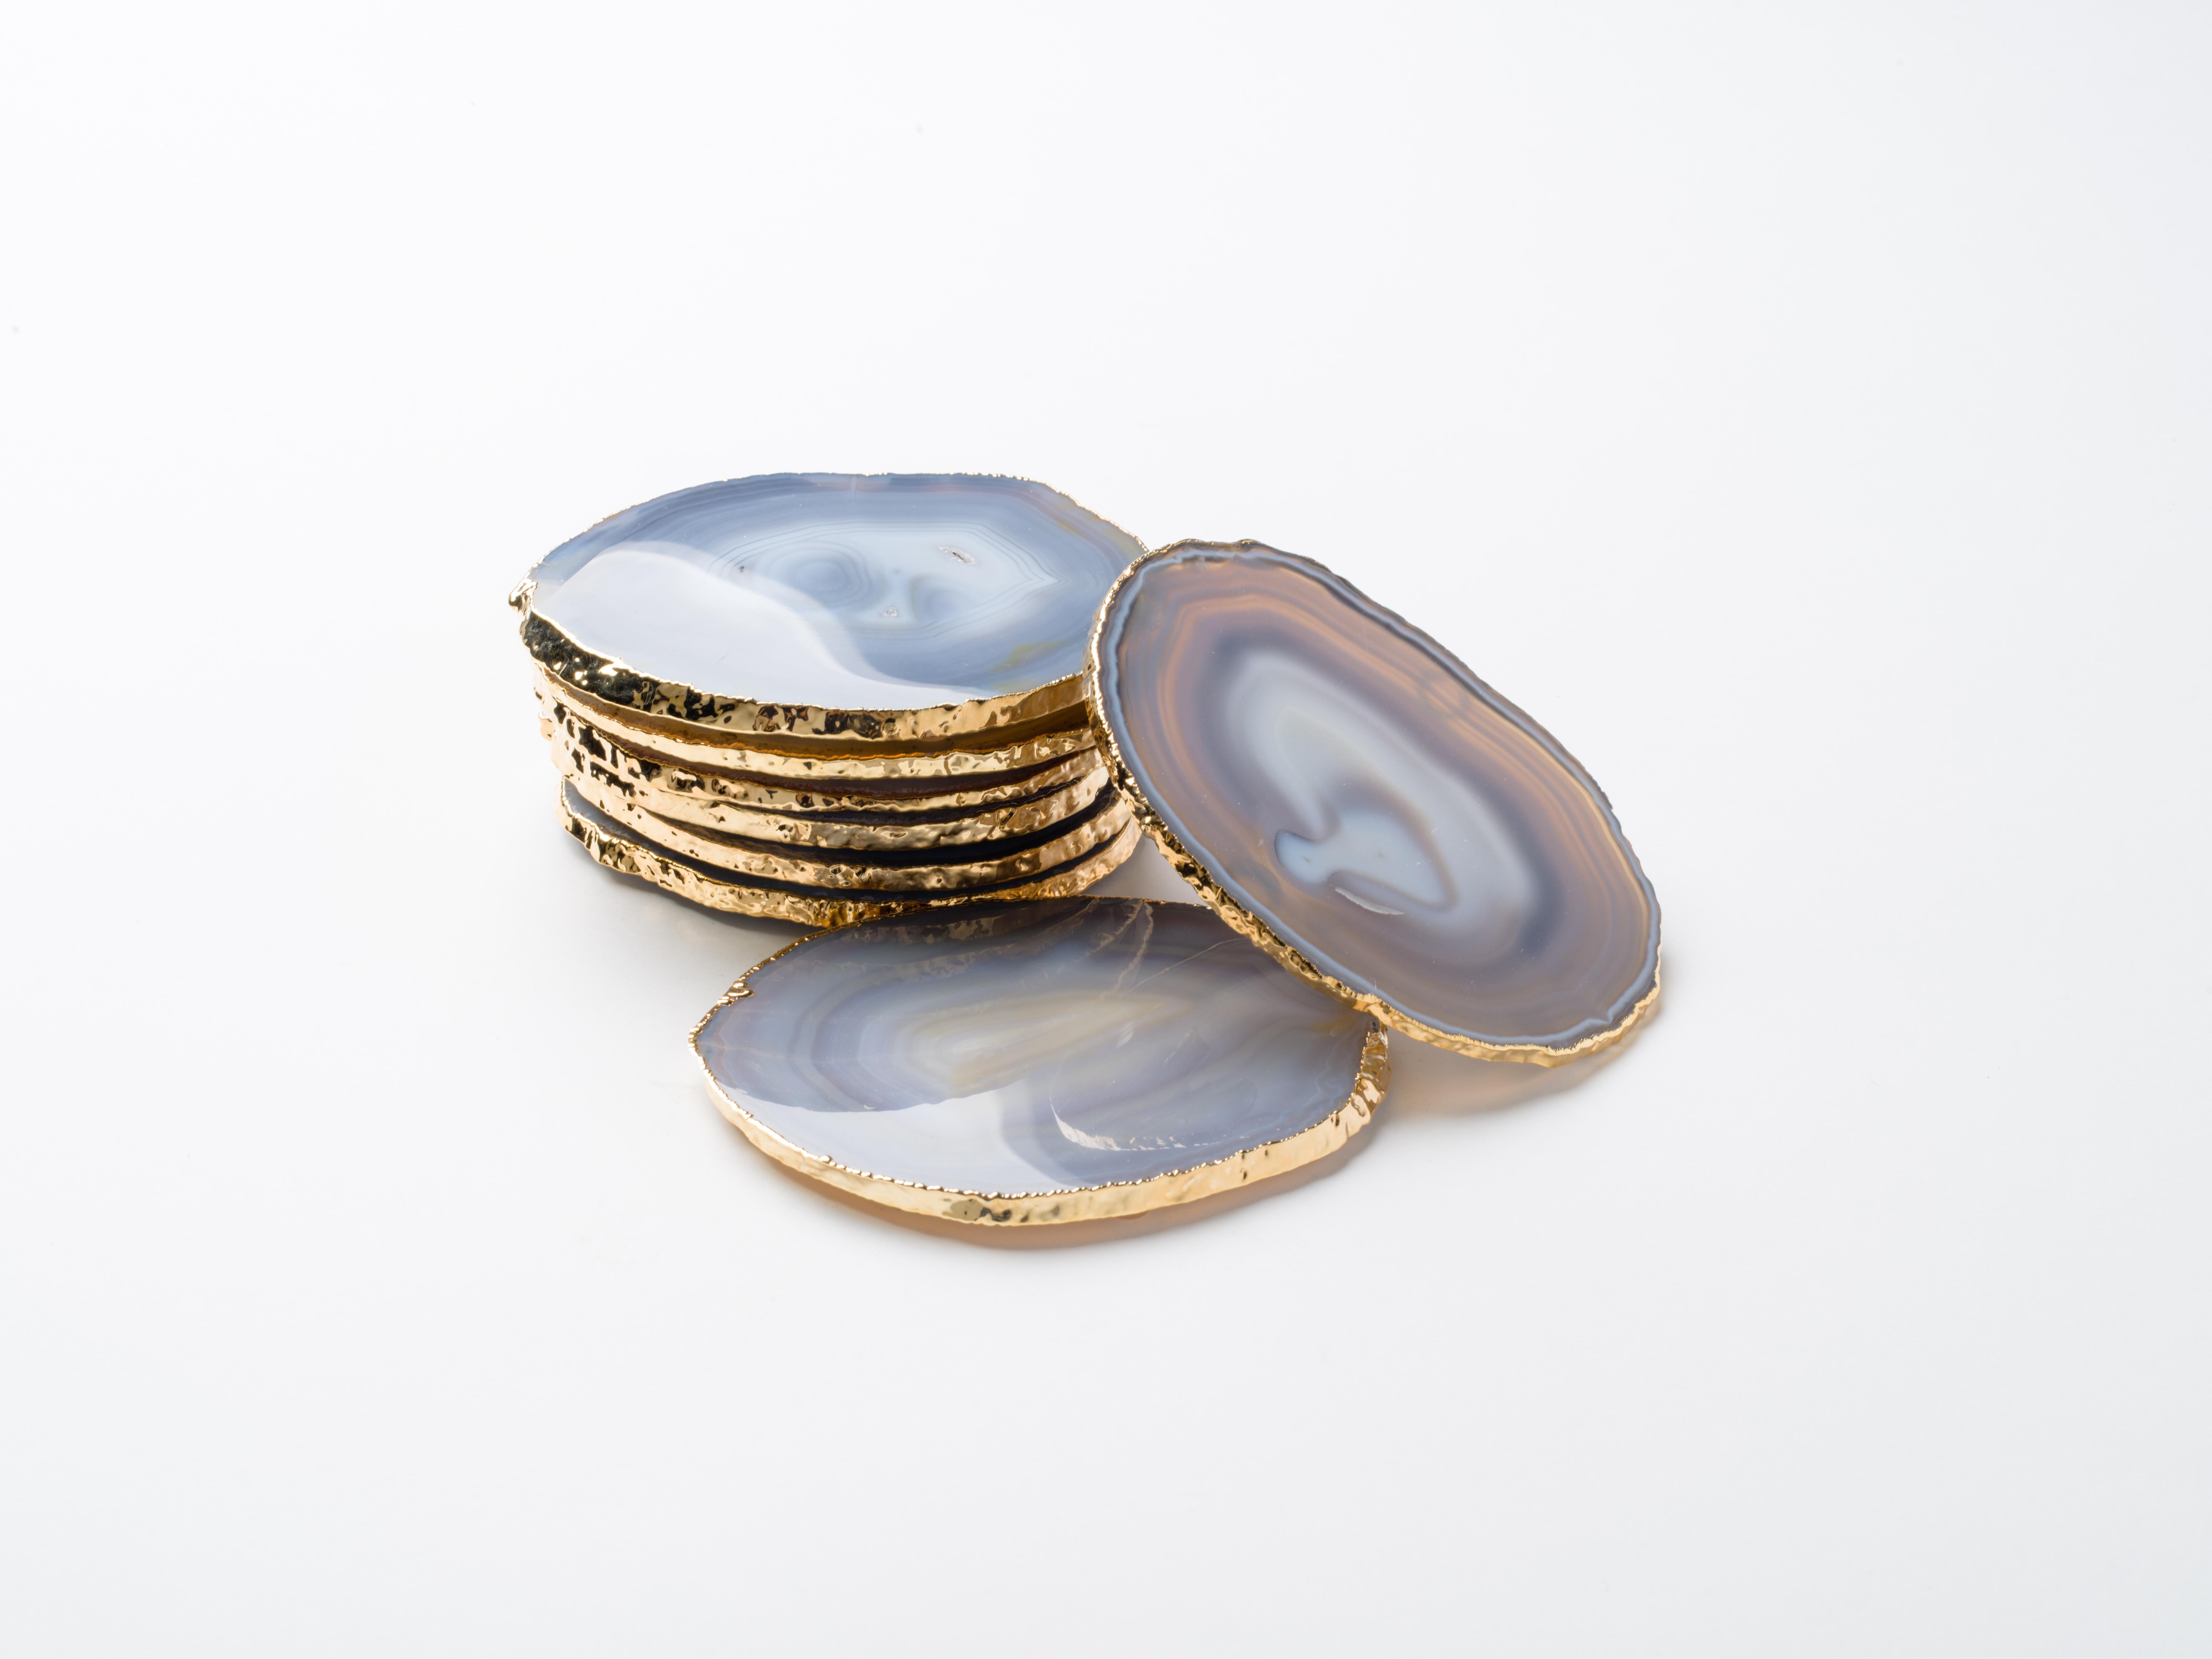 Stunning natural agate and crystal coasters with 24-karat gold plated edges. Three color variations are available: Teal, onyx or grey. Polished fronts and natural rough edges. No two pieces are alike. Make beautiful accessories to any coffee table